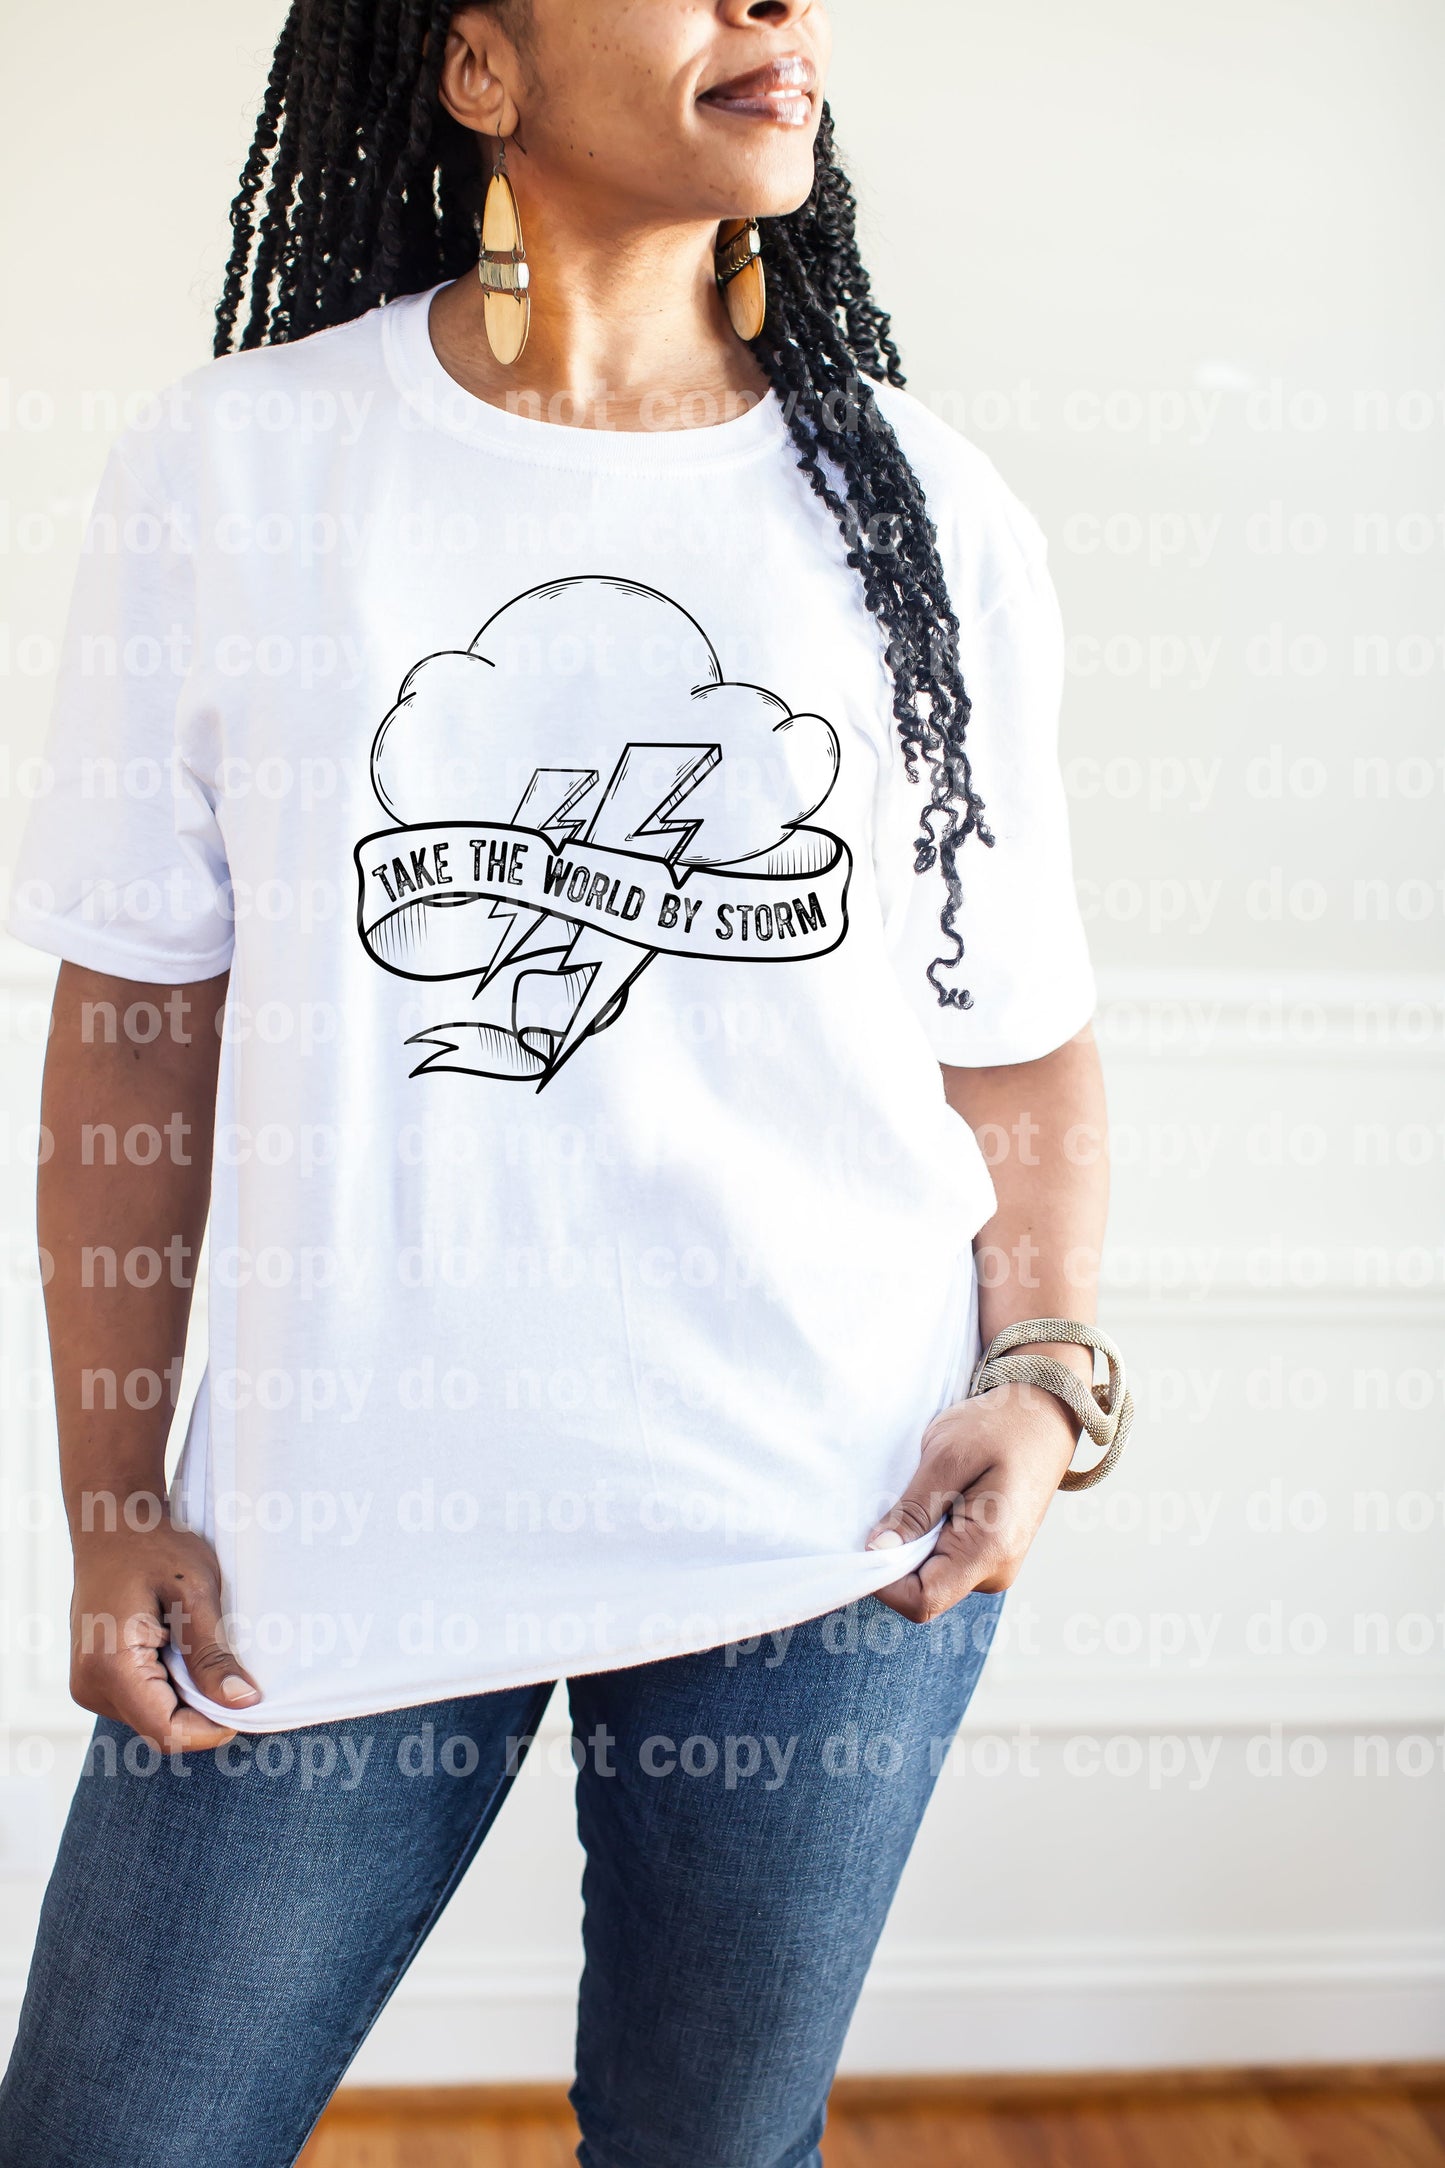 Take The World By Storm Full Color/One Color Dream Print or Sublimation Print